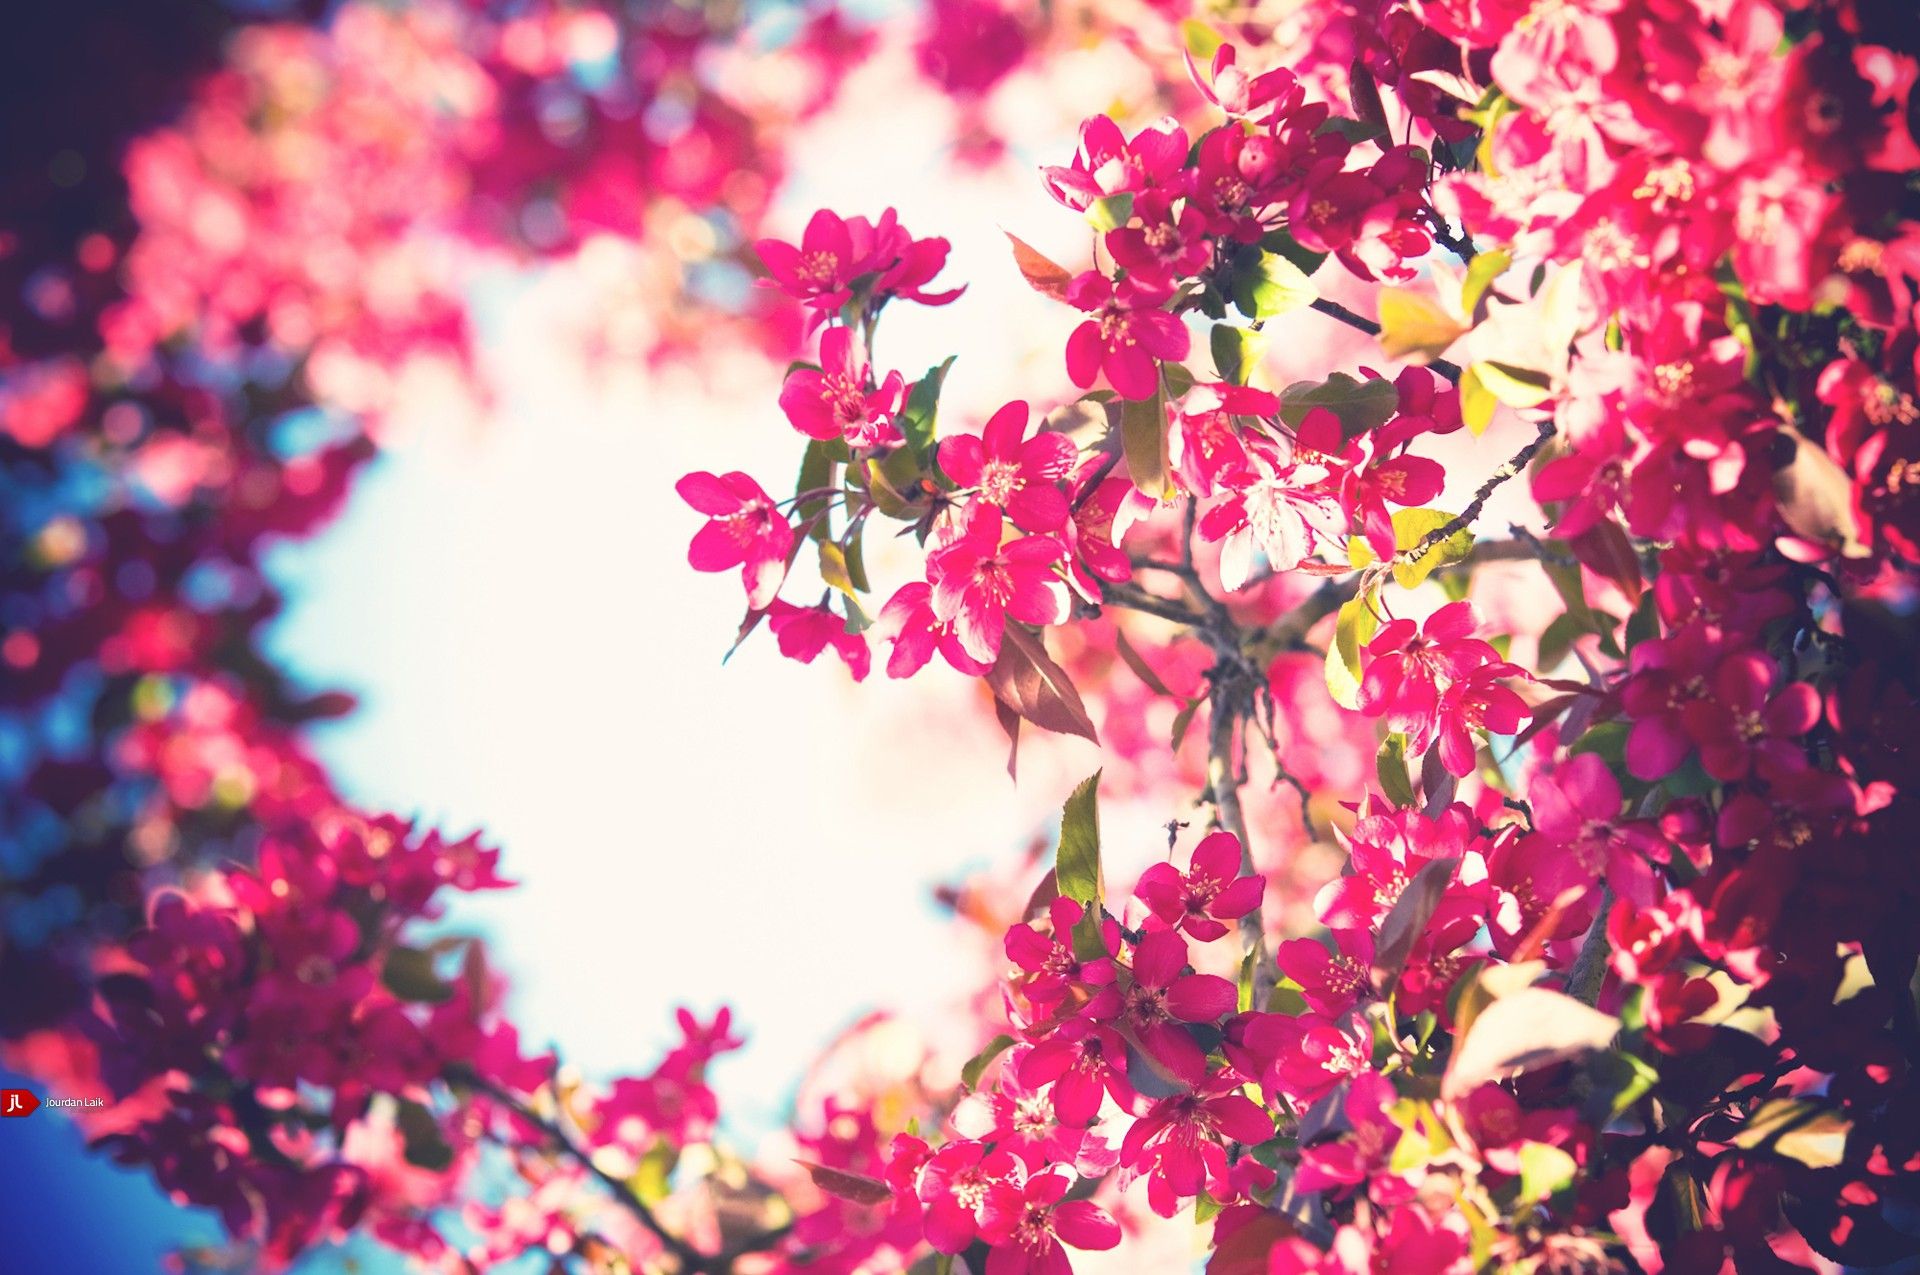 Flowers, Beautiful, And Pink Image